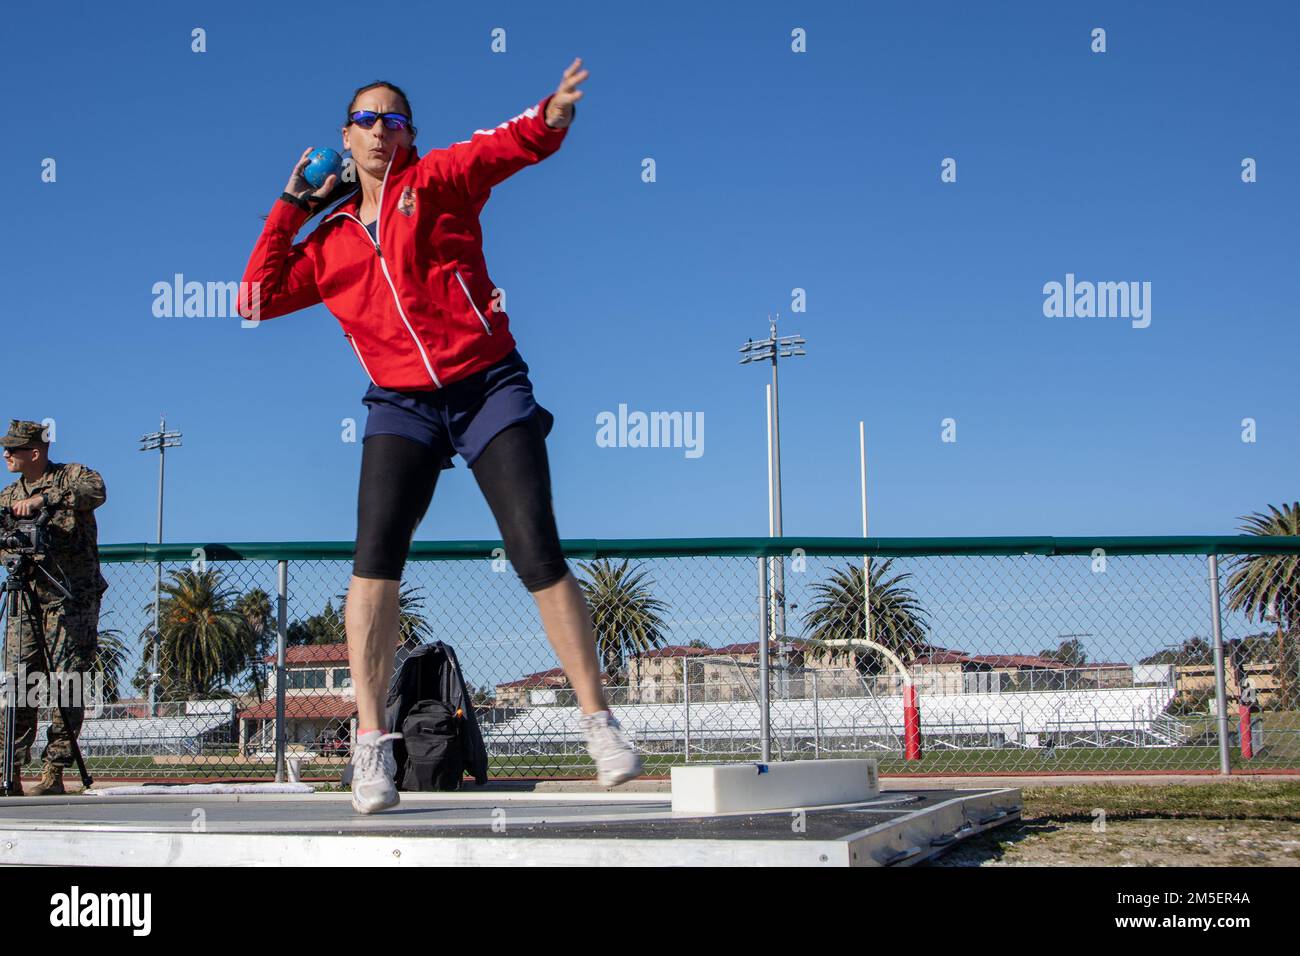 Retired U.S. Marine Corps Maj. Lisa Doring throws a shot put at Page field house during the 2020 West Coast Marine Corps Trials (MCT) track and field event on Marine Corps Base Camp Pendleton, California, March 8, 2022. The MCT is an adaptive sports event involving more than 75 wounded, ill, or injured Marines, Sailors, veterans, and international competitors. Stock Photo